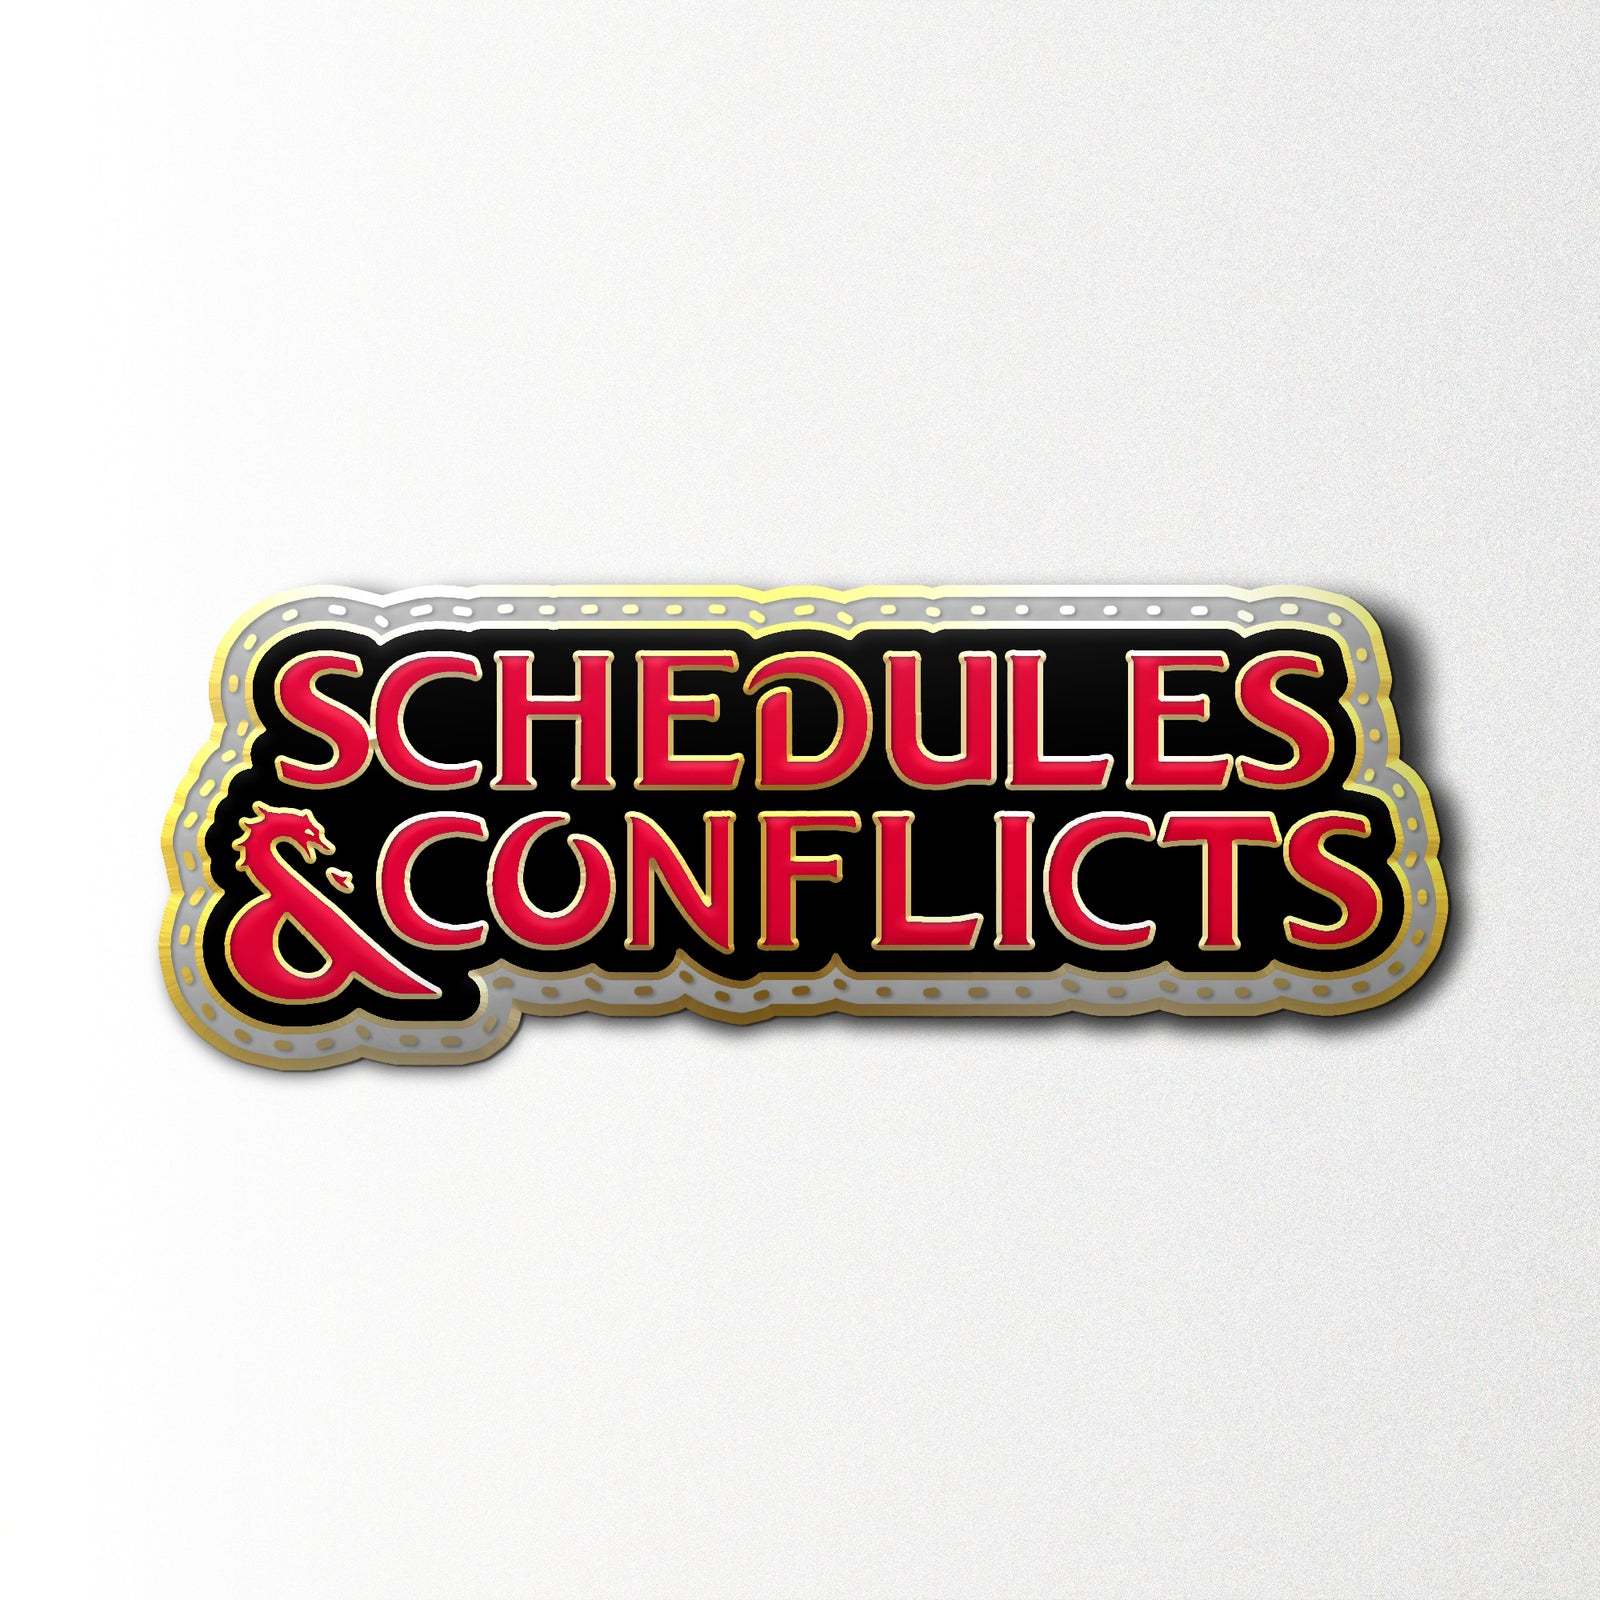 Scheduled & Conflicts